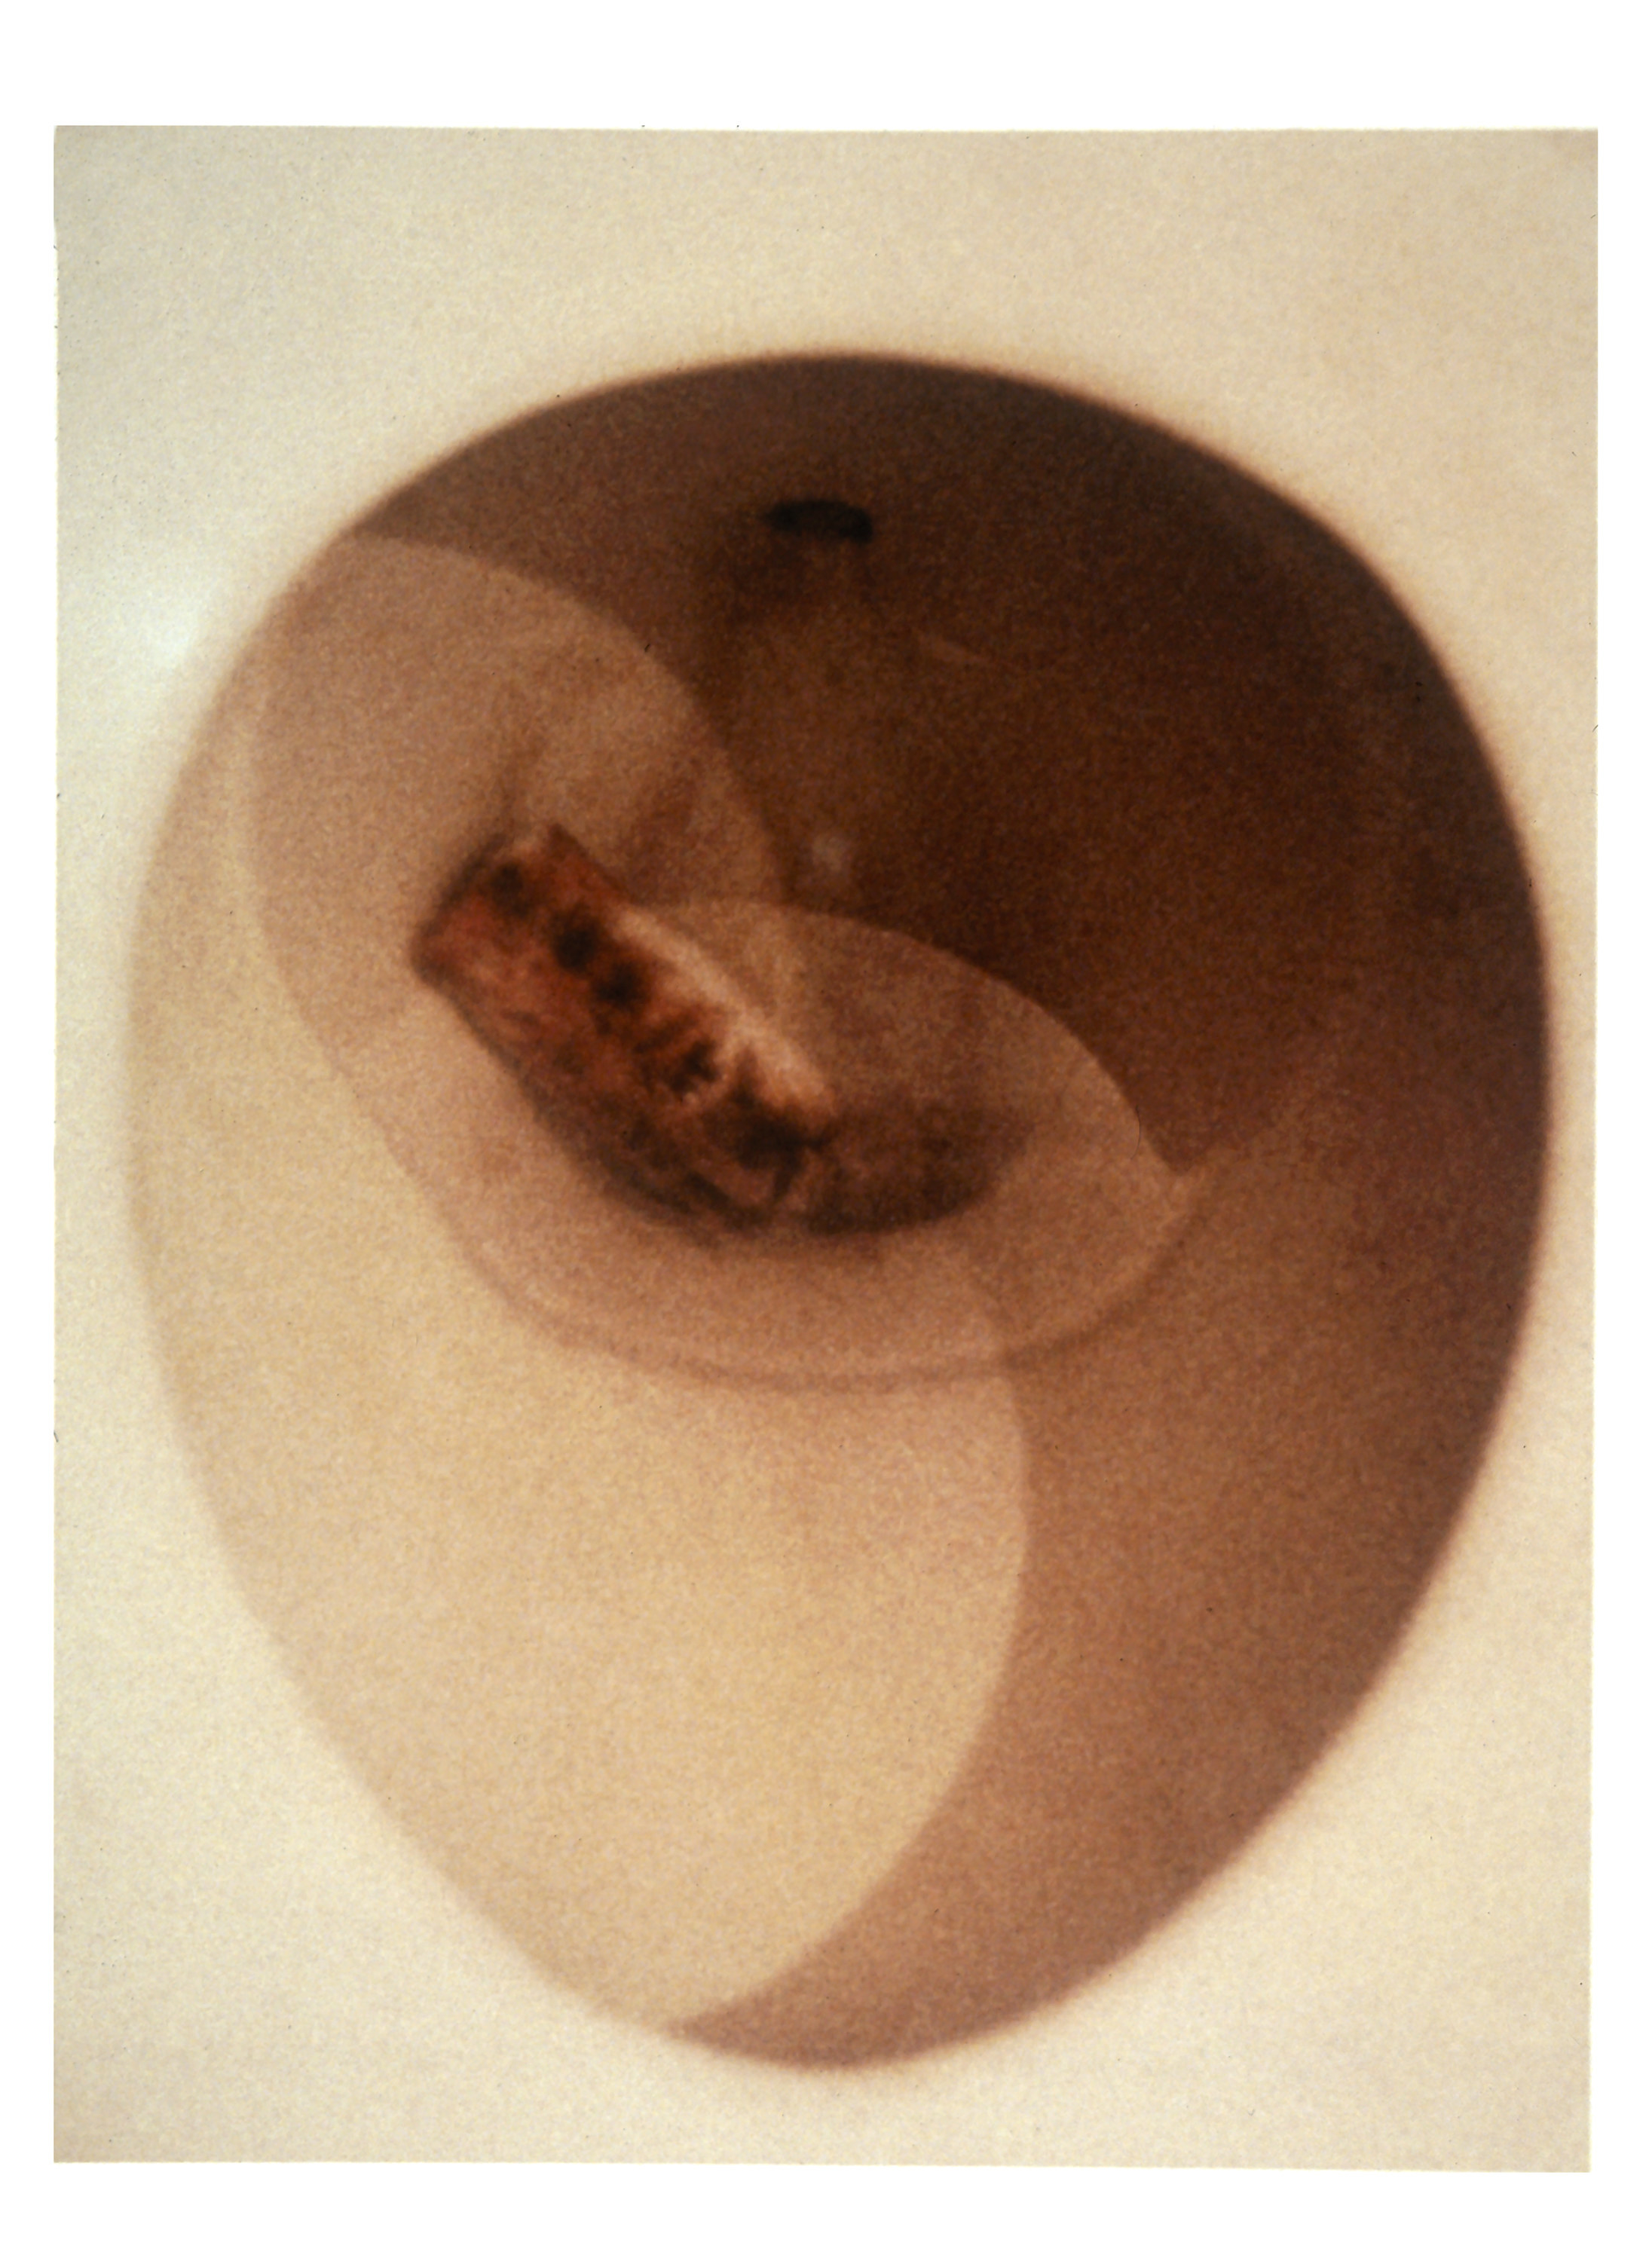 An abstracted bowel movement in a toilet bowl 